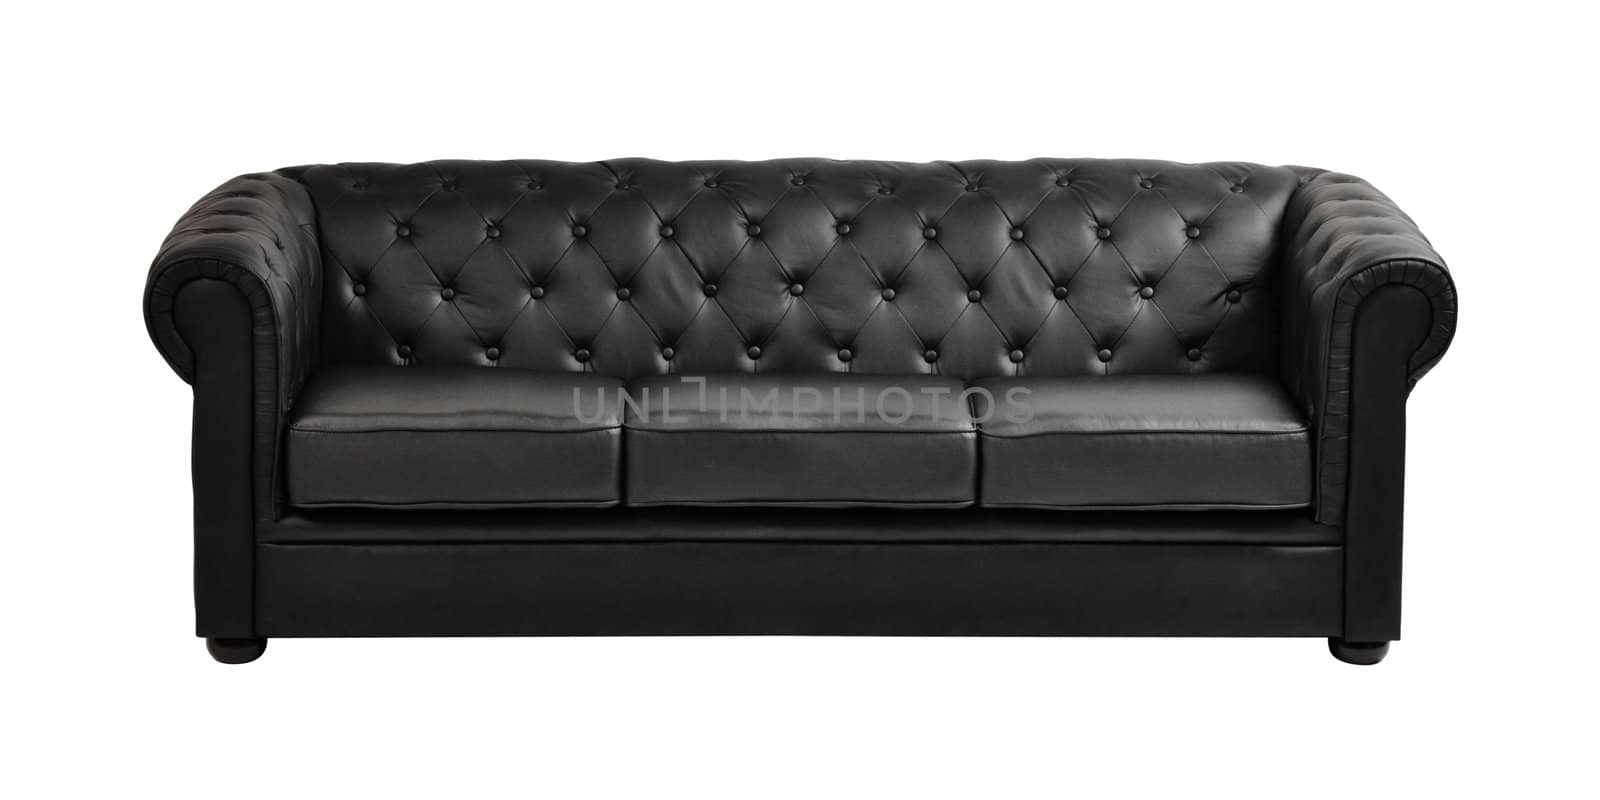 Black sofa isolated on white background by ozaiachin